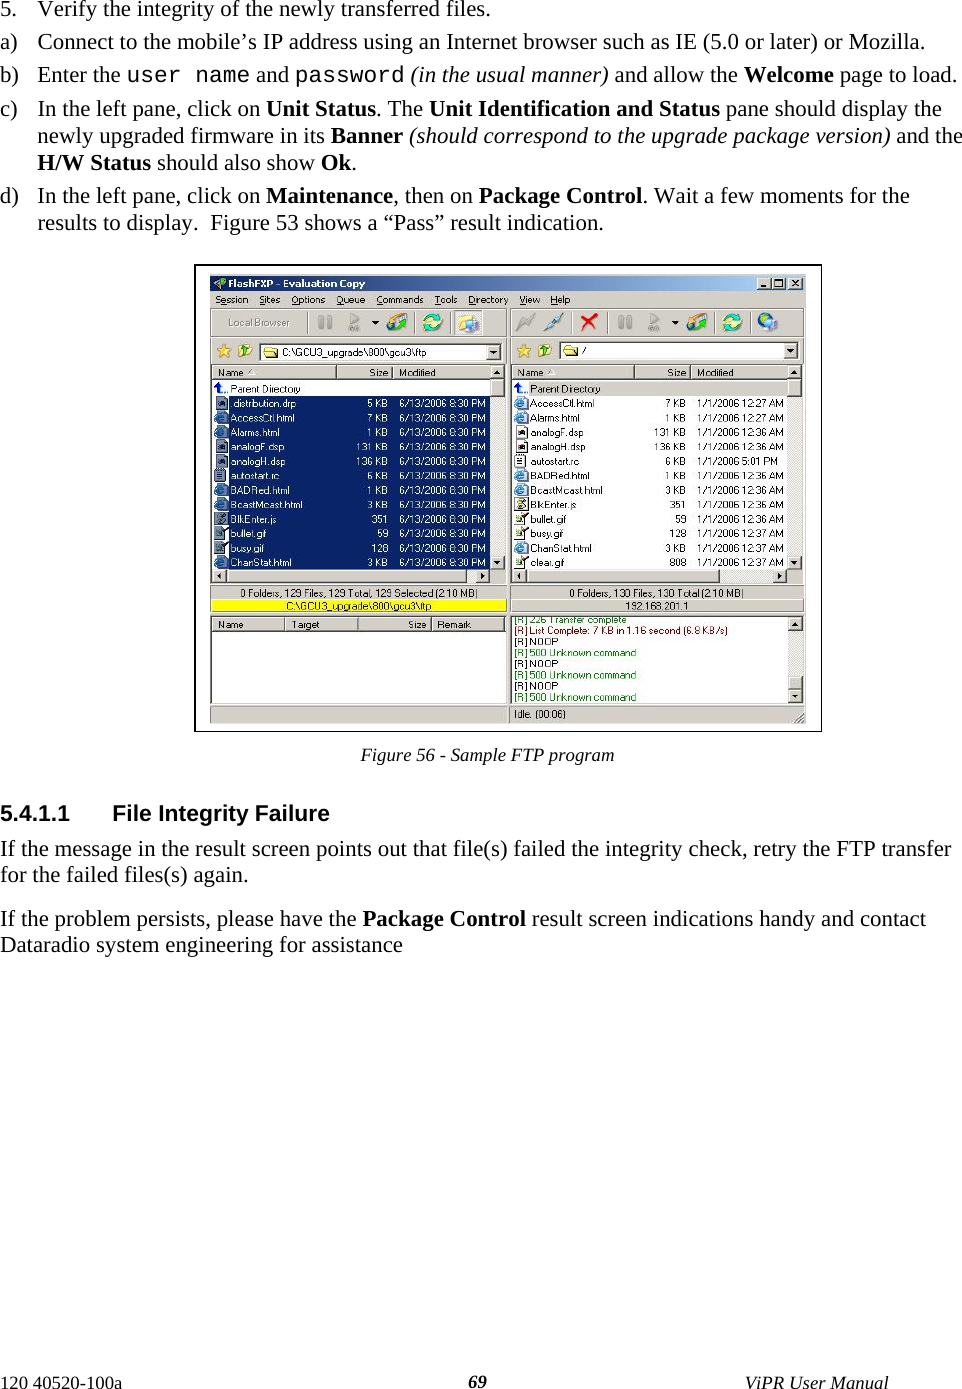  5.  Verify the integrity of the newly transferred files.  a)  Connect to the mobile’s IP address using an Internet browser such as IE (5.0 or later) or Mozilla.  b) Enter the user name and password (in the usual manner) and allow the Welcome page to load.  c)  In the left pane, click on Unit Status. The Unit Identification and Status pane should display the newly upgraded firmware in its Banner (should correspond to the upgrade package version) and the H/W Status should also show Ok. d)  In the left pane, click on Maintenance, then on Package Control. Wait a few moments for the results to display.  Figure 53 shows a “Pass” result indication.   Figure 56 - Sample FTP program  5.4.1.1  File Integrity Failure If the message in the result screen points out that file(s) failed the integrity check, retry the FTP transfer for the failed files(s) again.  If the problem persists, please have the Package Control result screen indications handy and contact Dataradio system engineering for assistance 120 40520-100a    ViPR User Manual  69